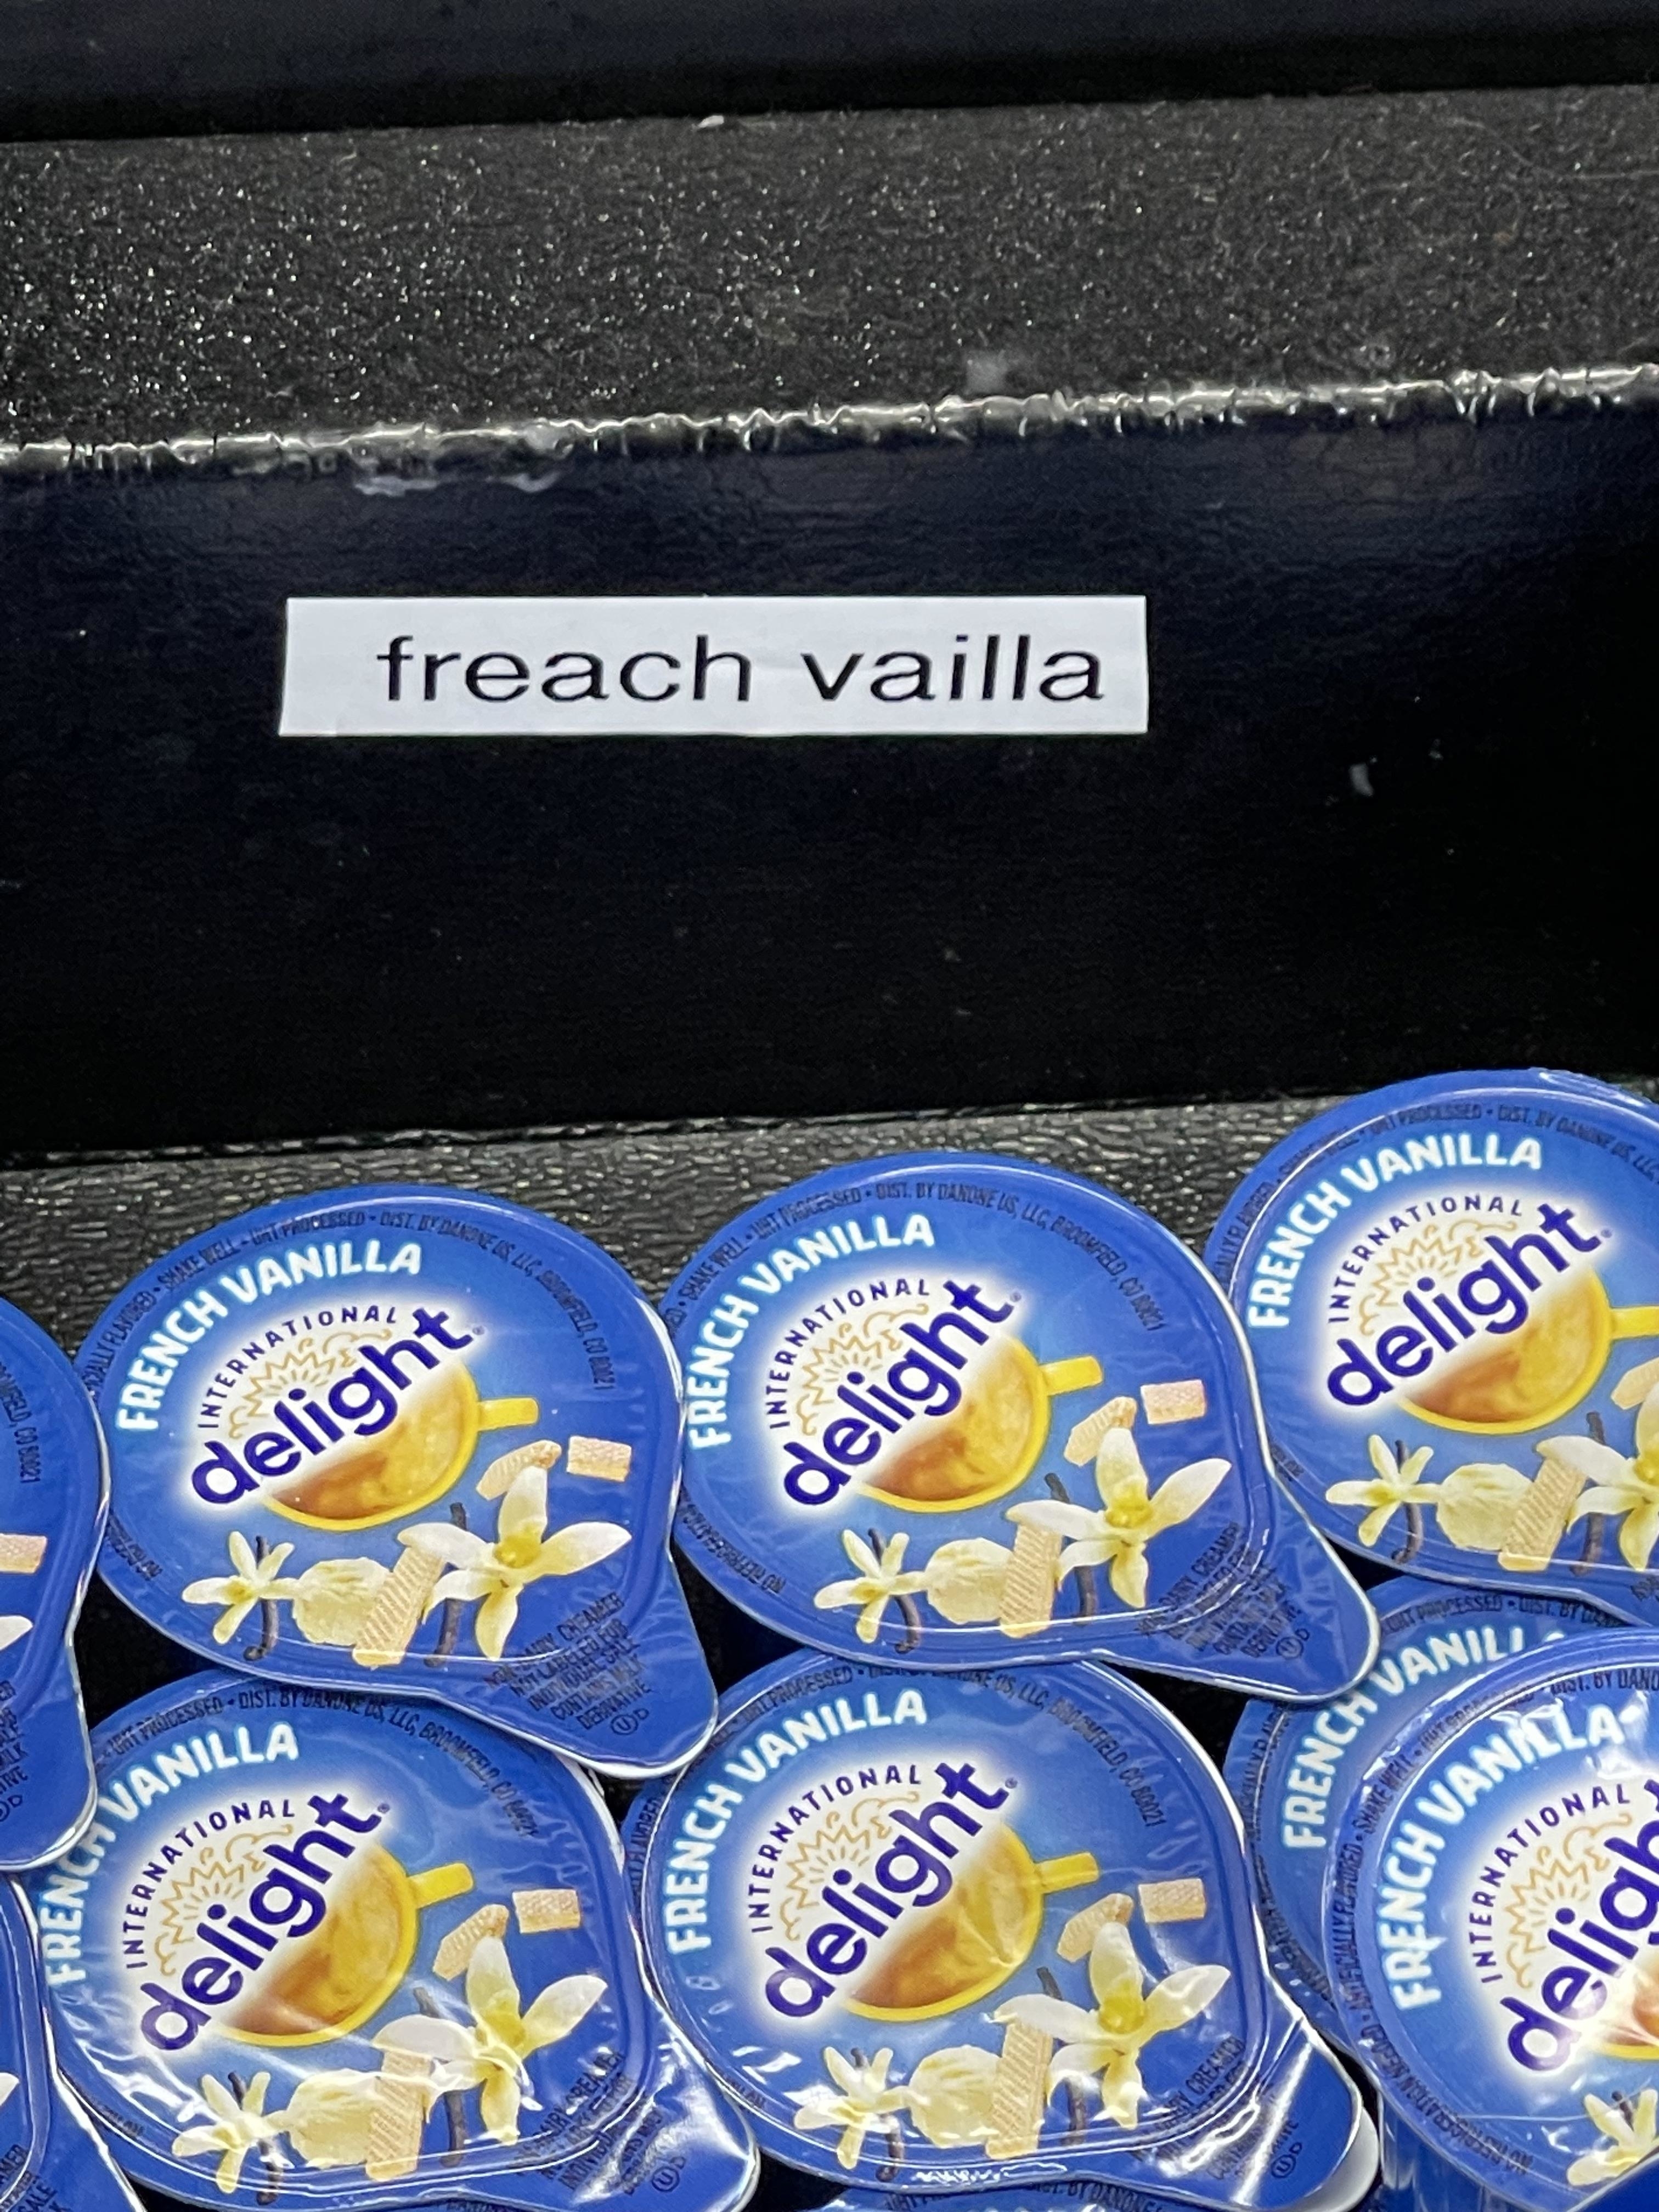 Image of coffee creamer cups labeled &quot;French Vanilla,&quot; with a sign mistakenly spelling it as &quot;freach vailla.&quot;